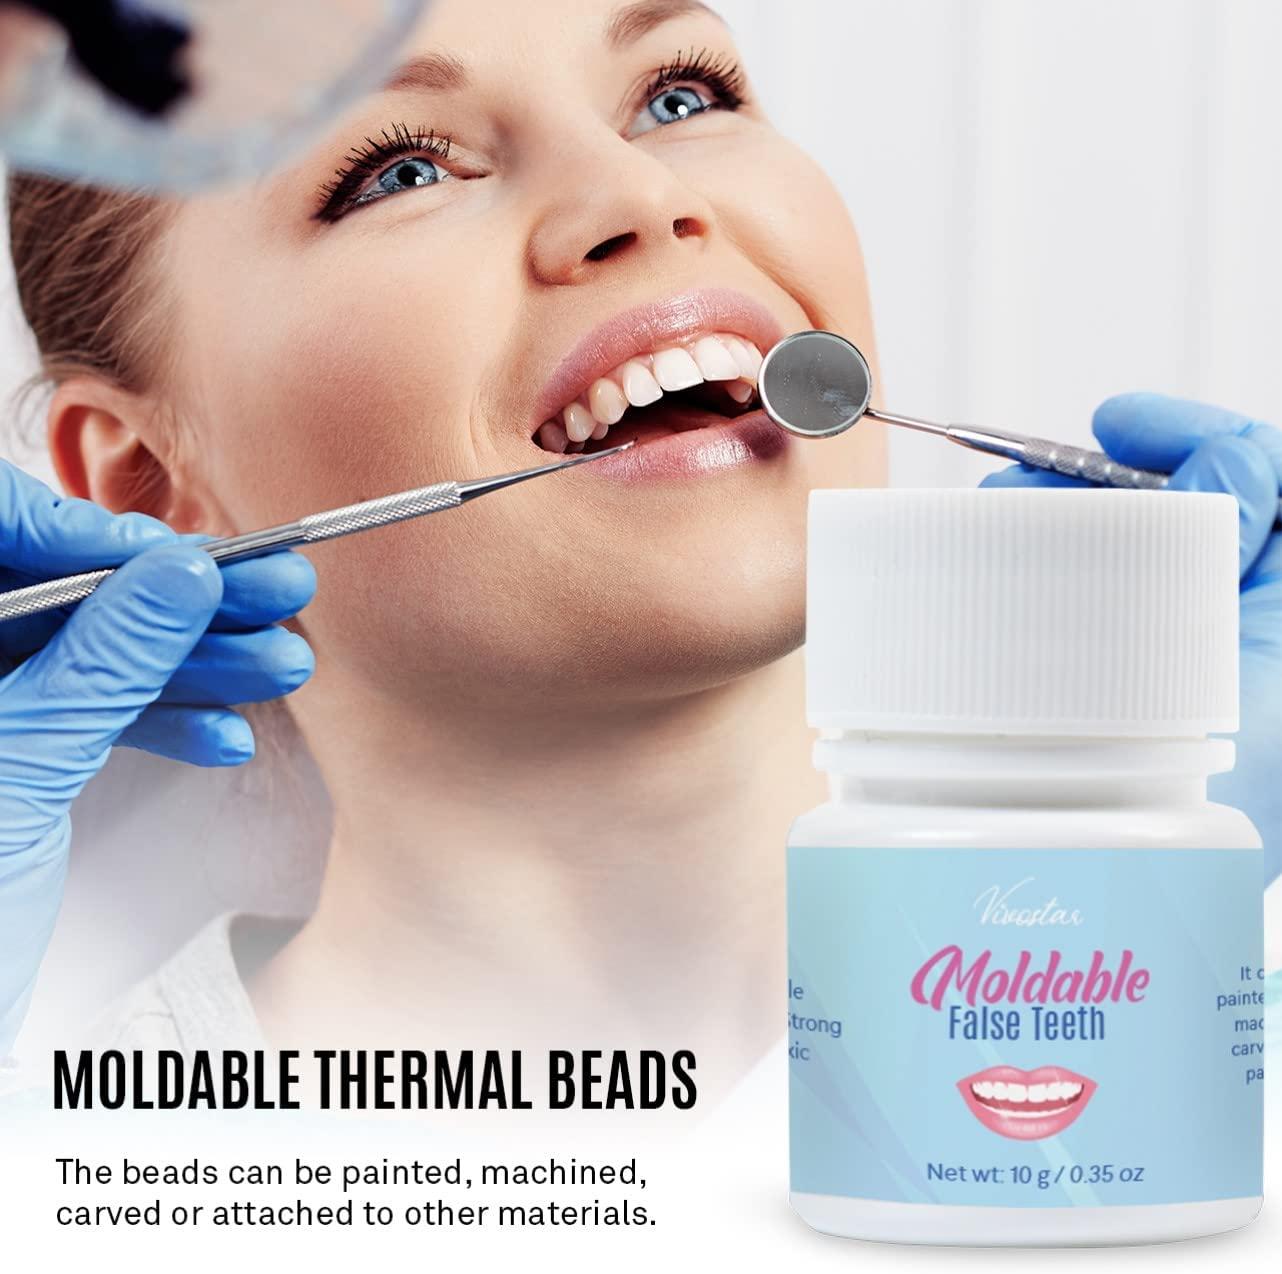  Multi-functional Temporary Tooth Repair Kit Moldable Thermal  Fitting Beads for Snap On Instant and Confident Smile Denture Adhesive Fake  Teeth Cosmetic Braces Veneer : Health & Household